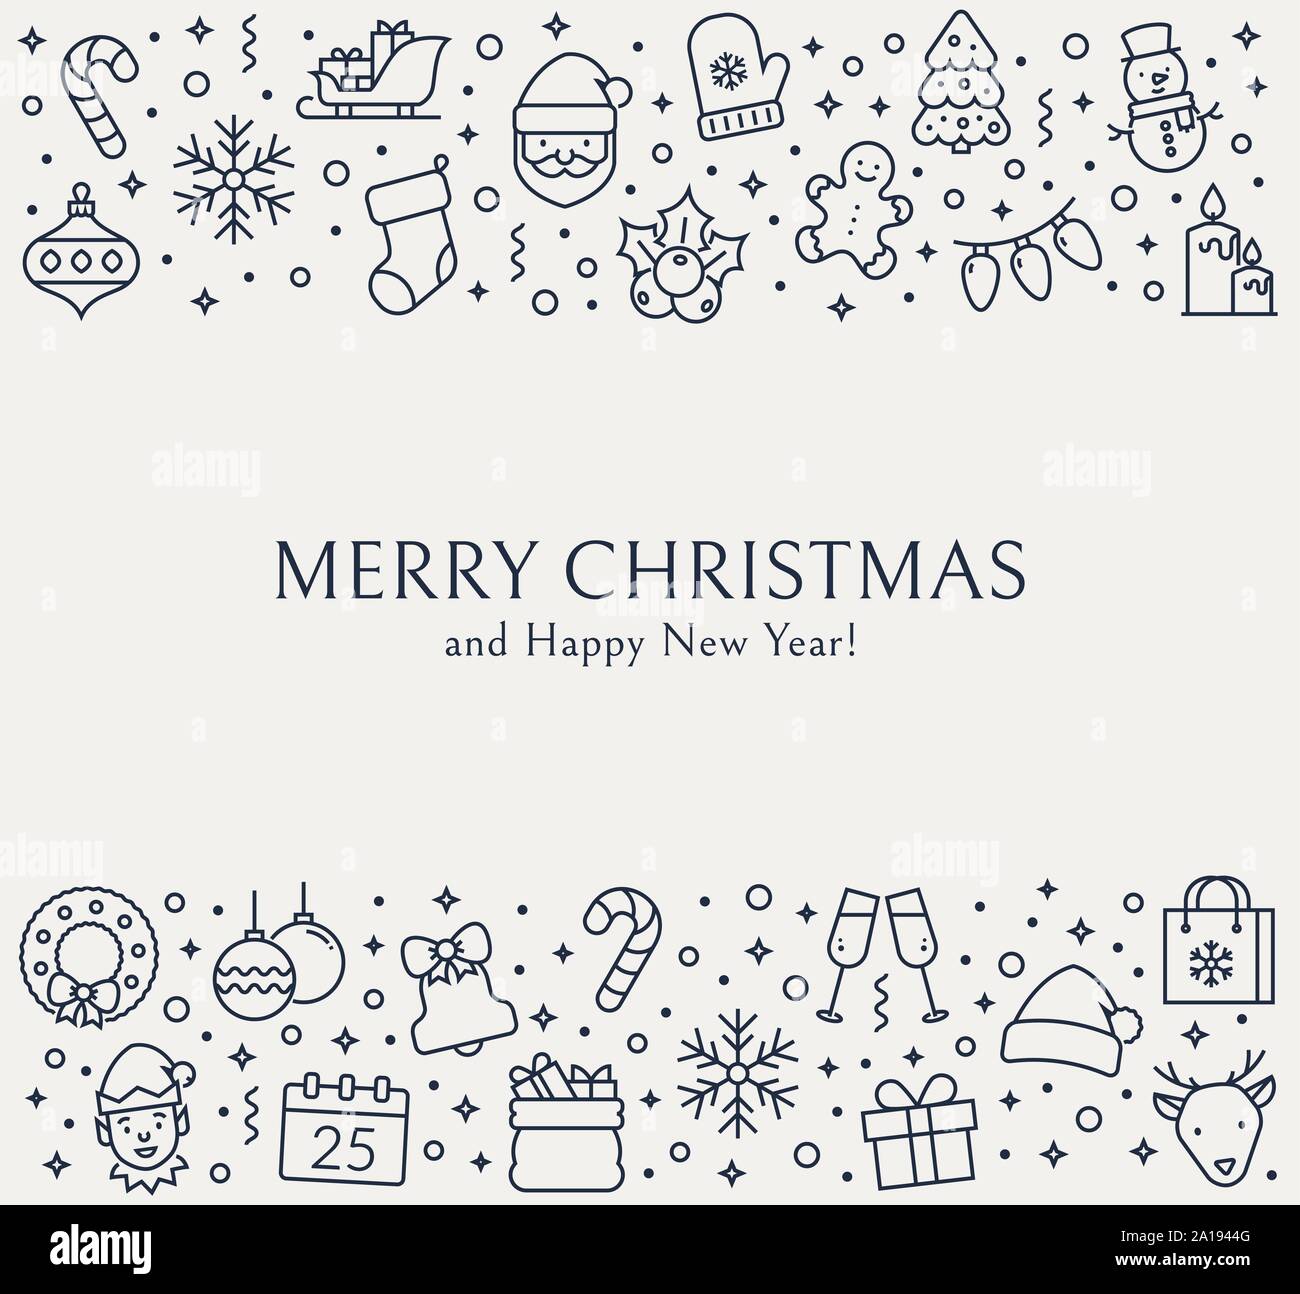 Christmas greeting card with outline icons. Merry Christmas and Happy New Year! Vector background with holiday symbols. Stock Vector